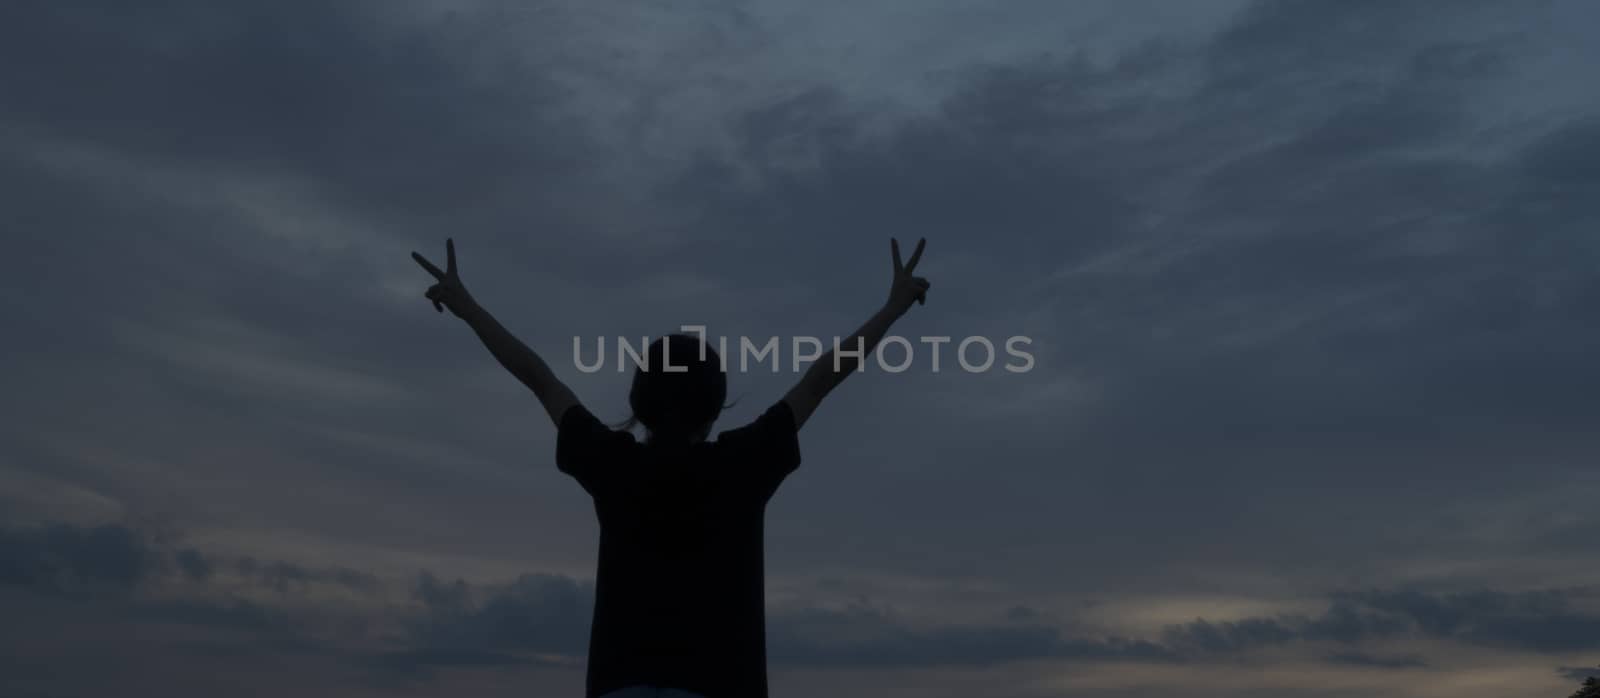 The silhouette of a woman with open hands by Fahroni